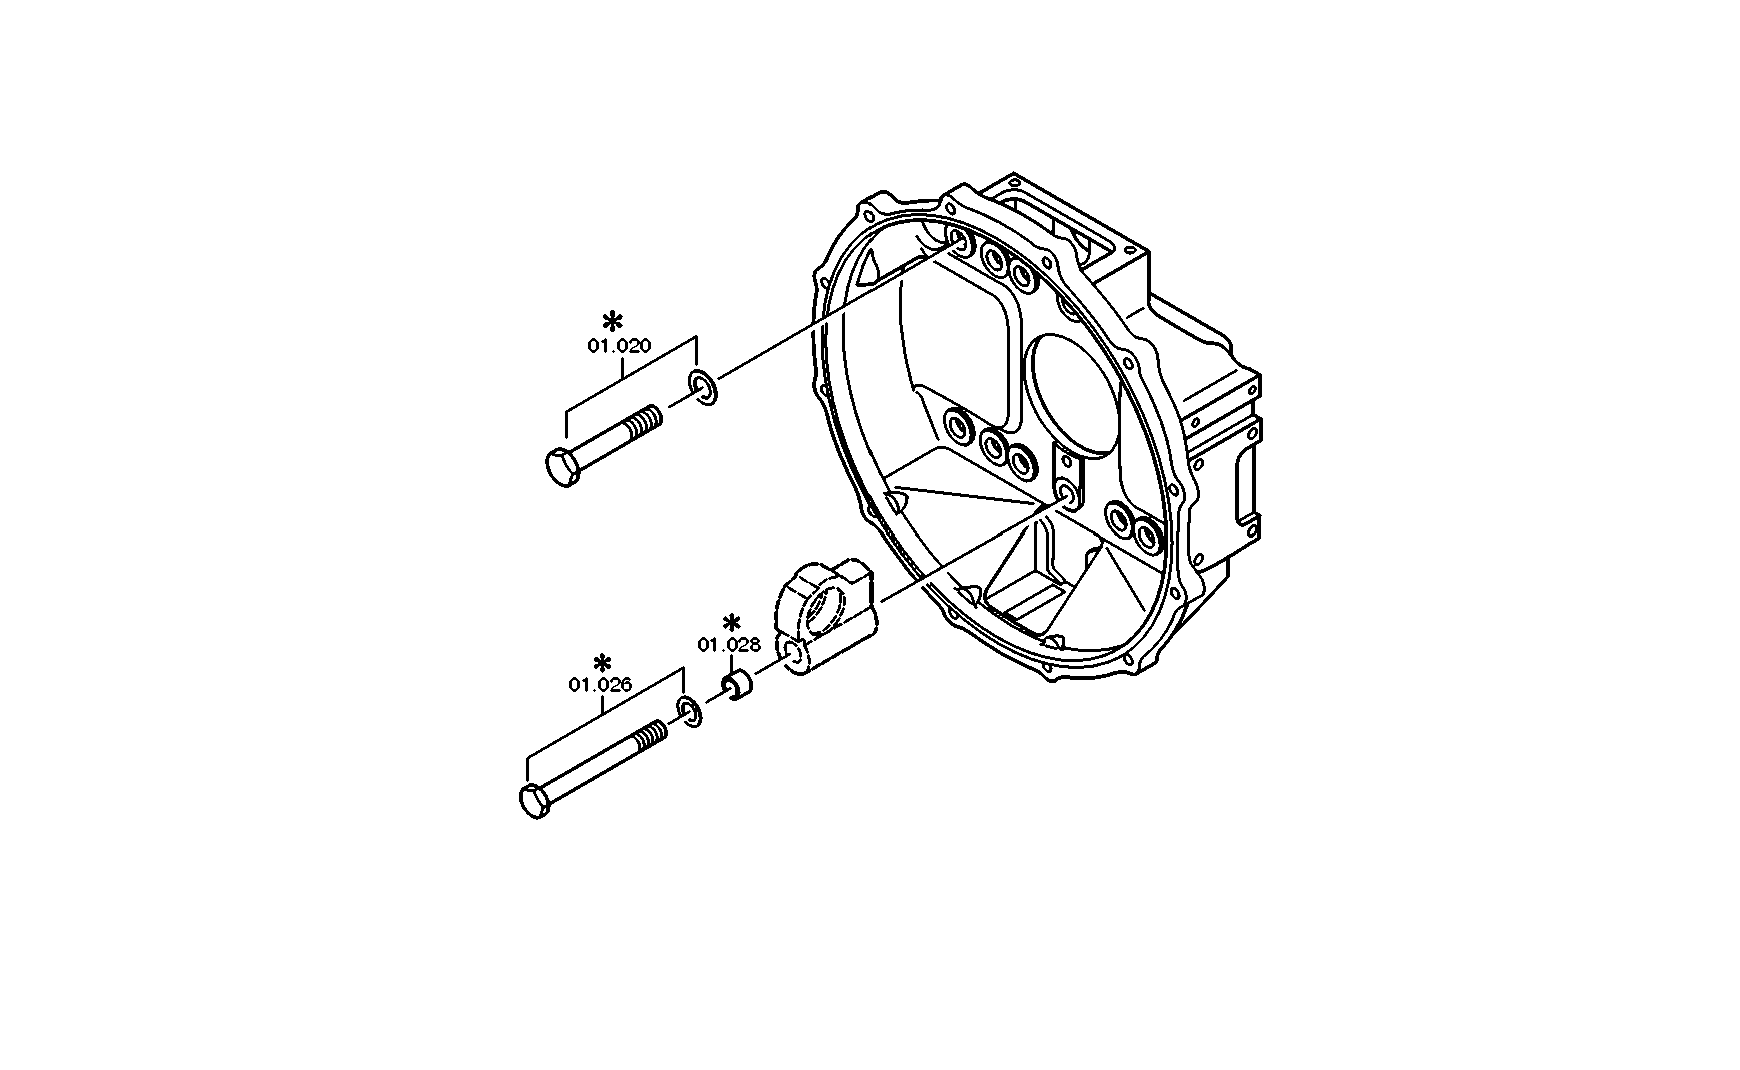 drawing for NISSAN MOTOR CO. 501006795 - CLUTCH CYLINDER (figure 3)